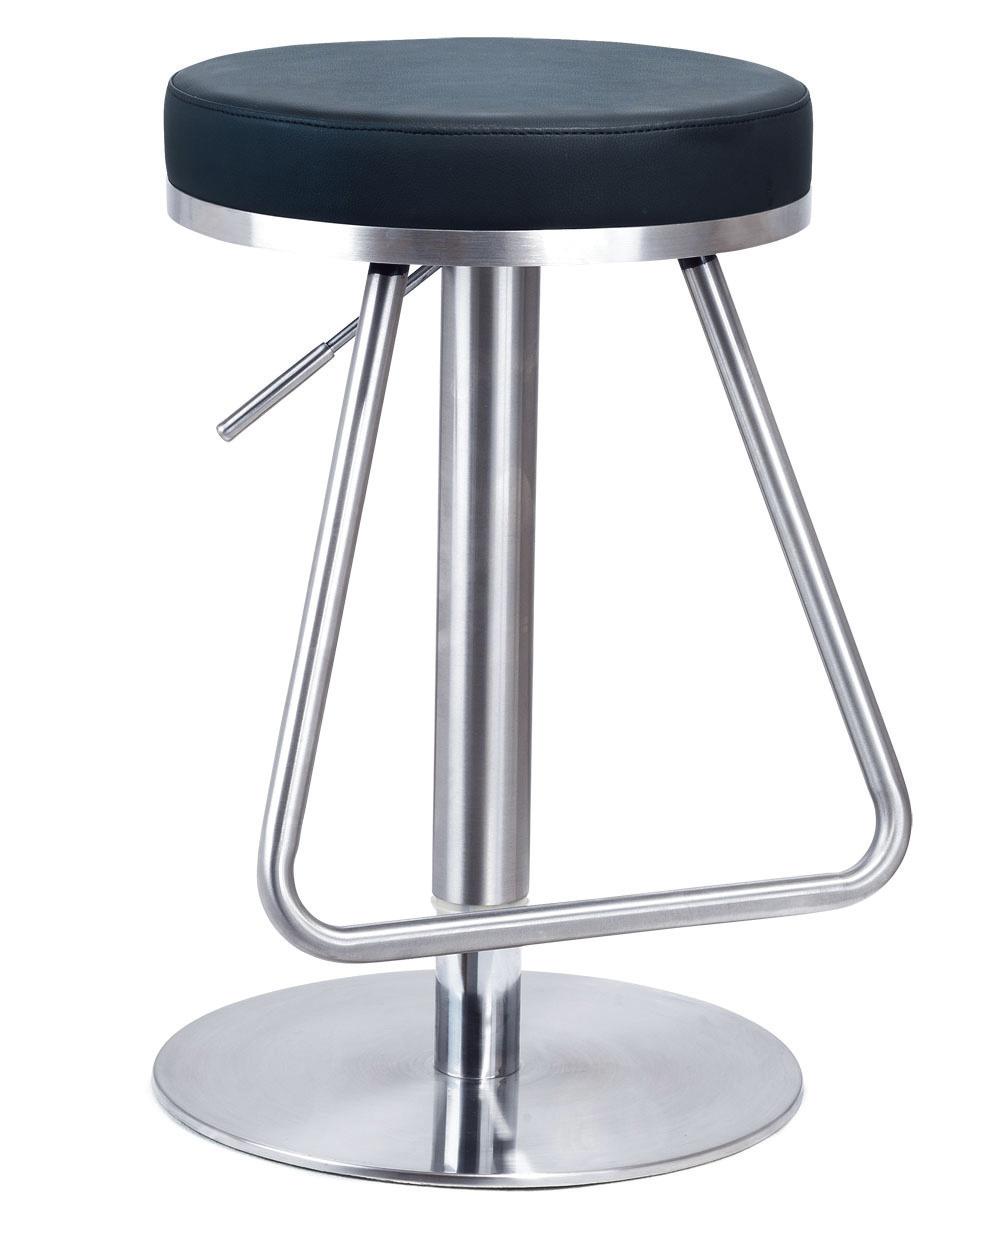 Stainless Steel High Chair Vintage Bar Stool